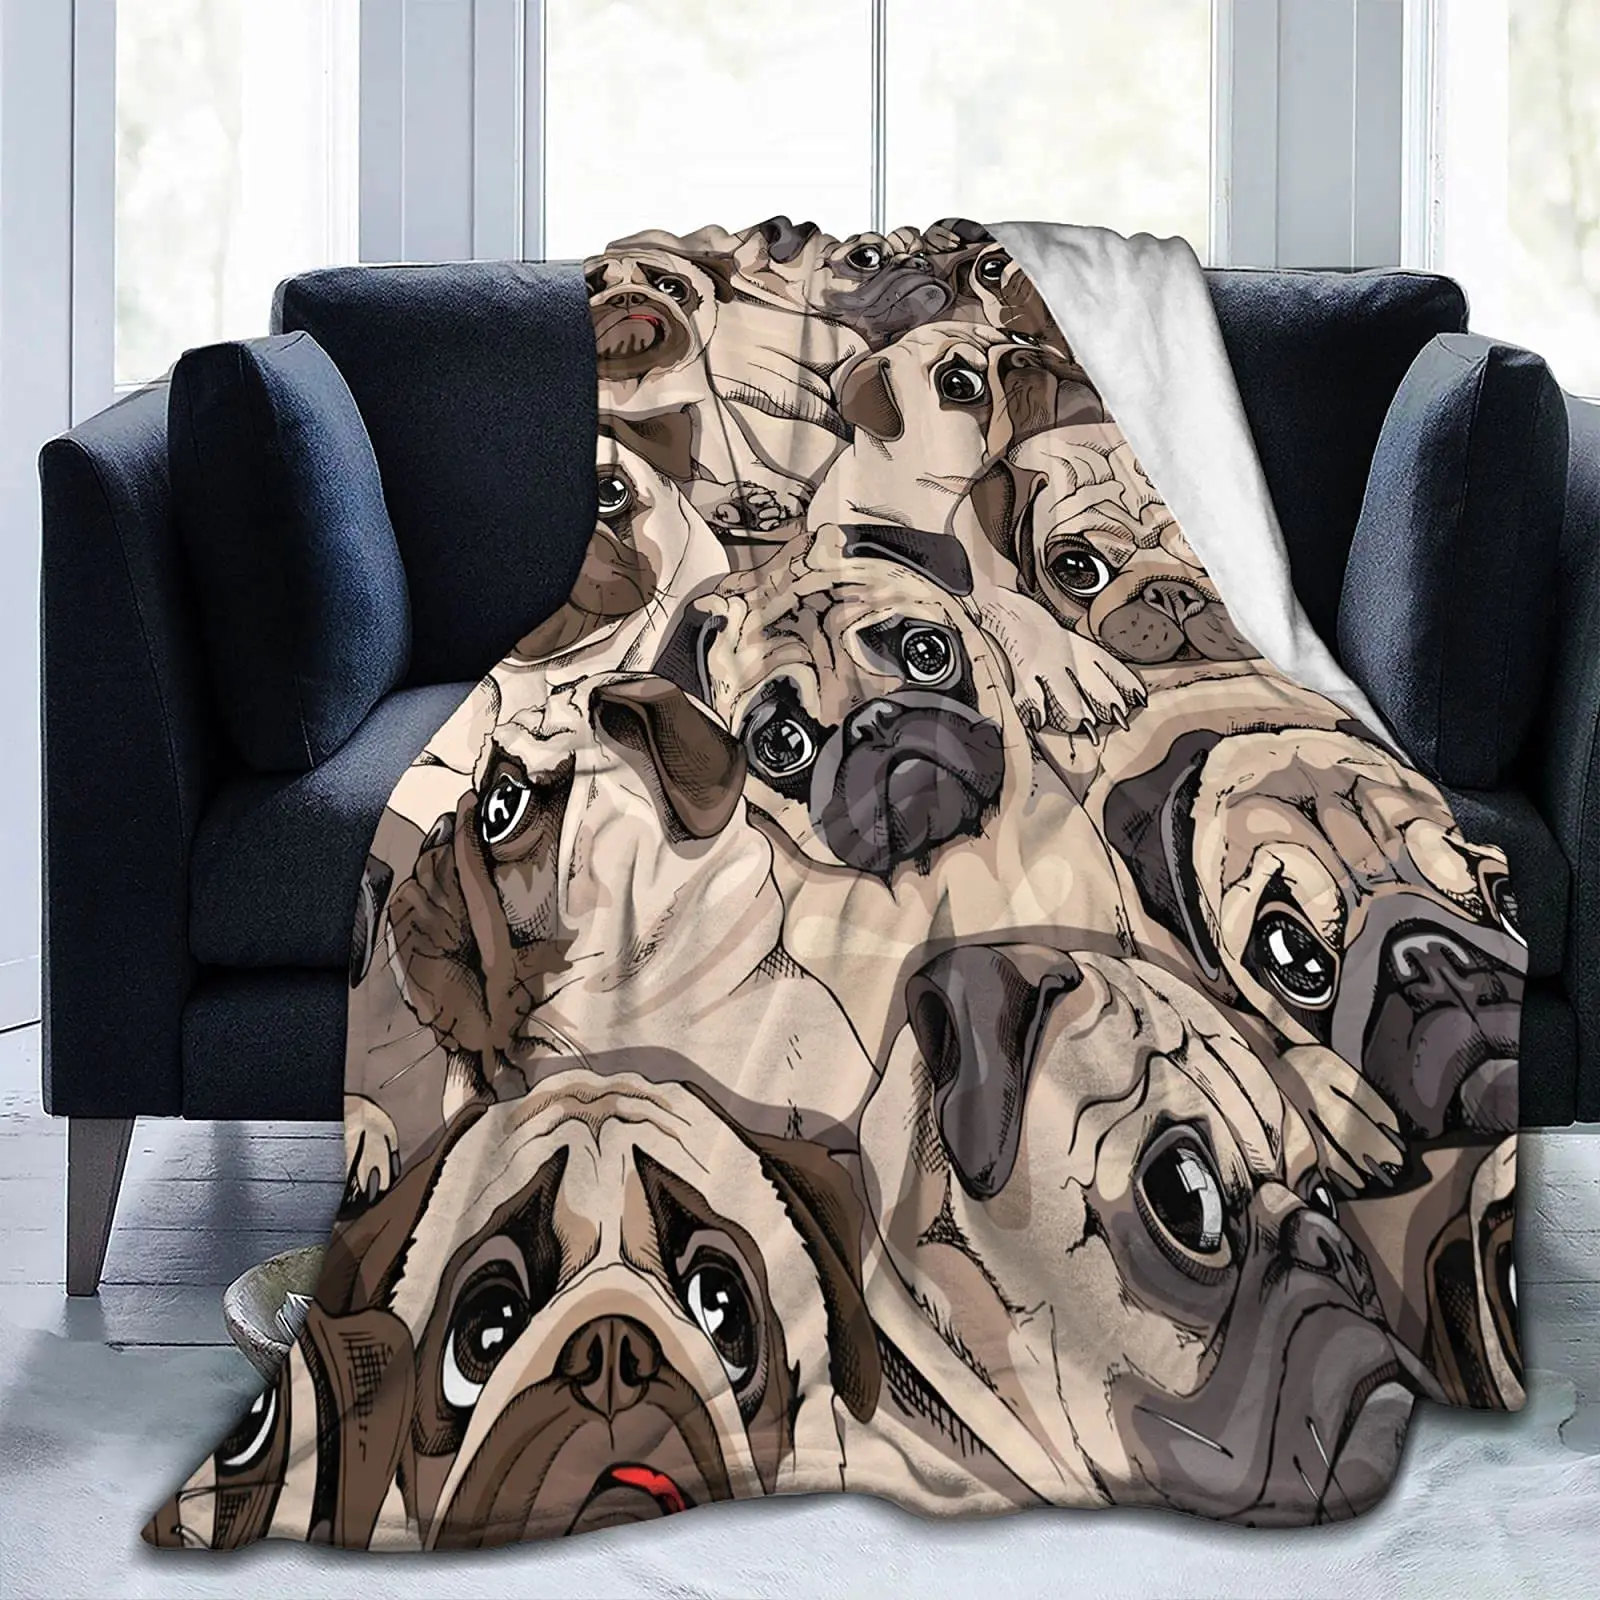 

Cute Pug Dog Blanket Animal Bedding Flannel Throw Blanket Soft Cozy Plush Blanket for Couch Bed Sofa Travelling Camping,gifts